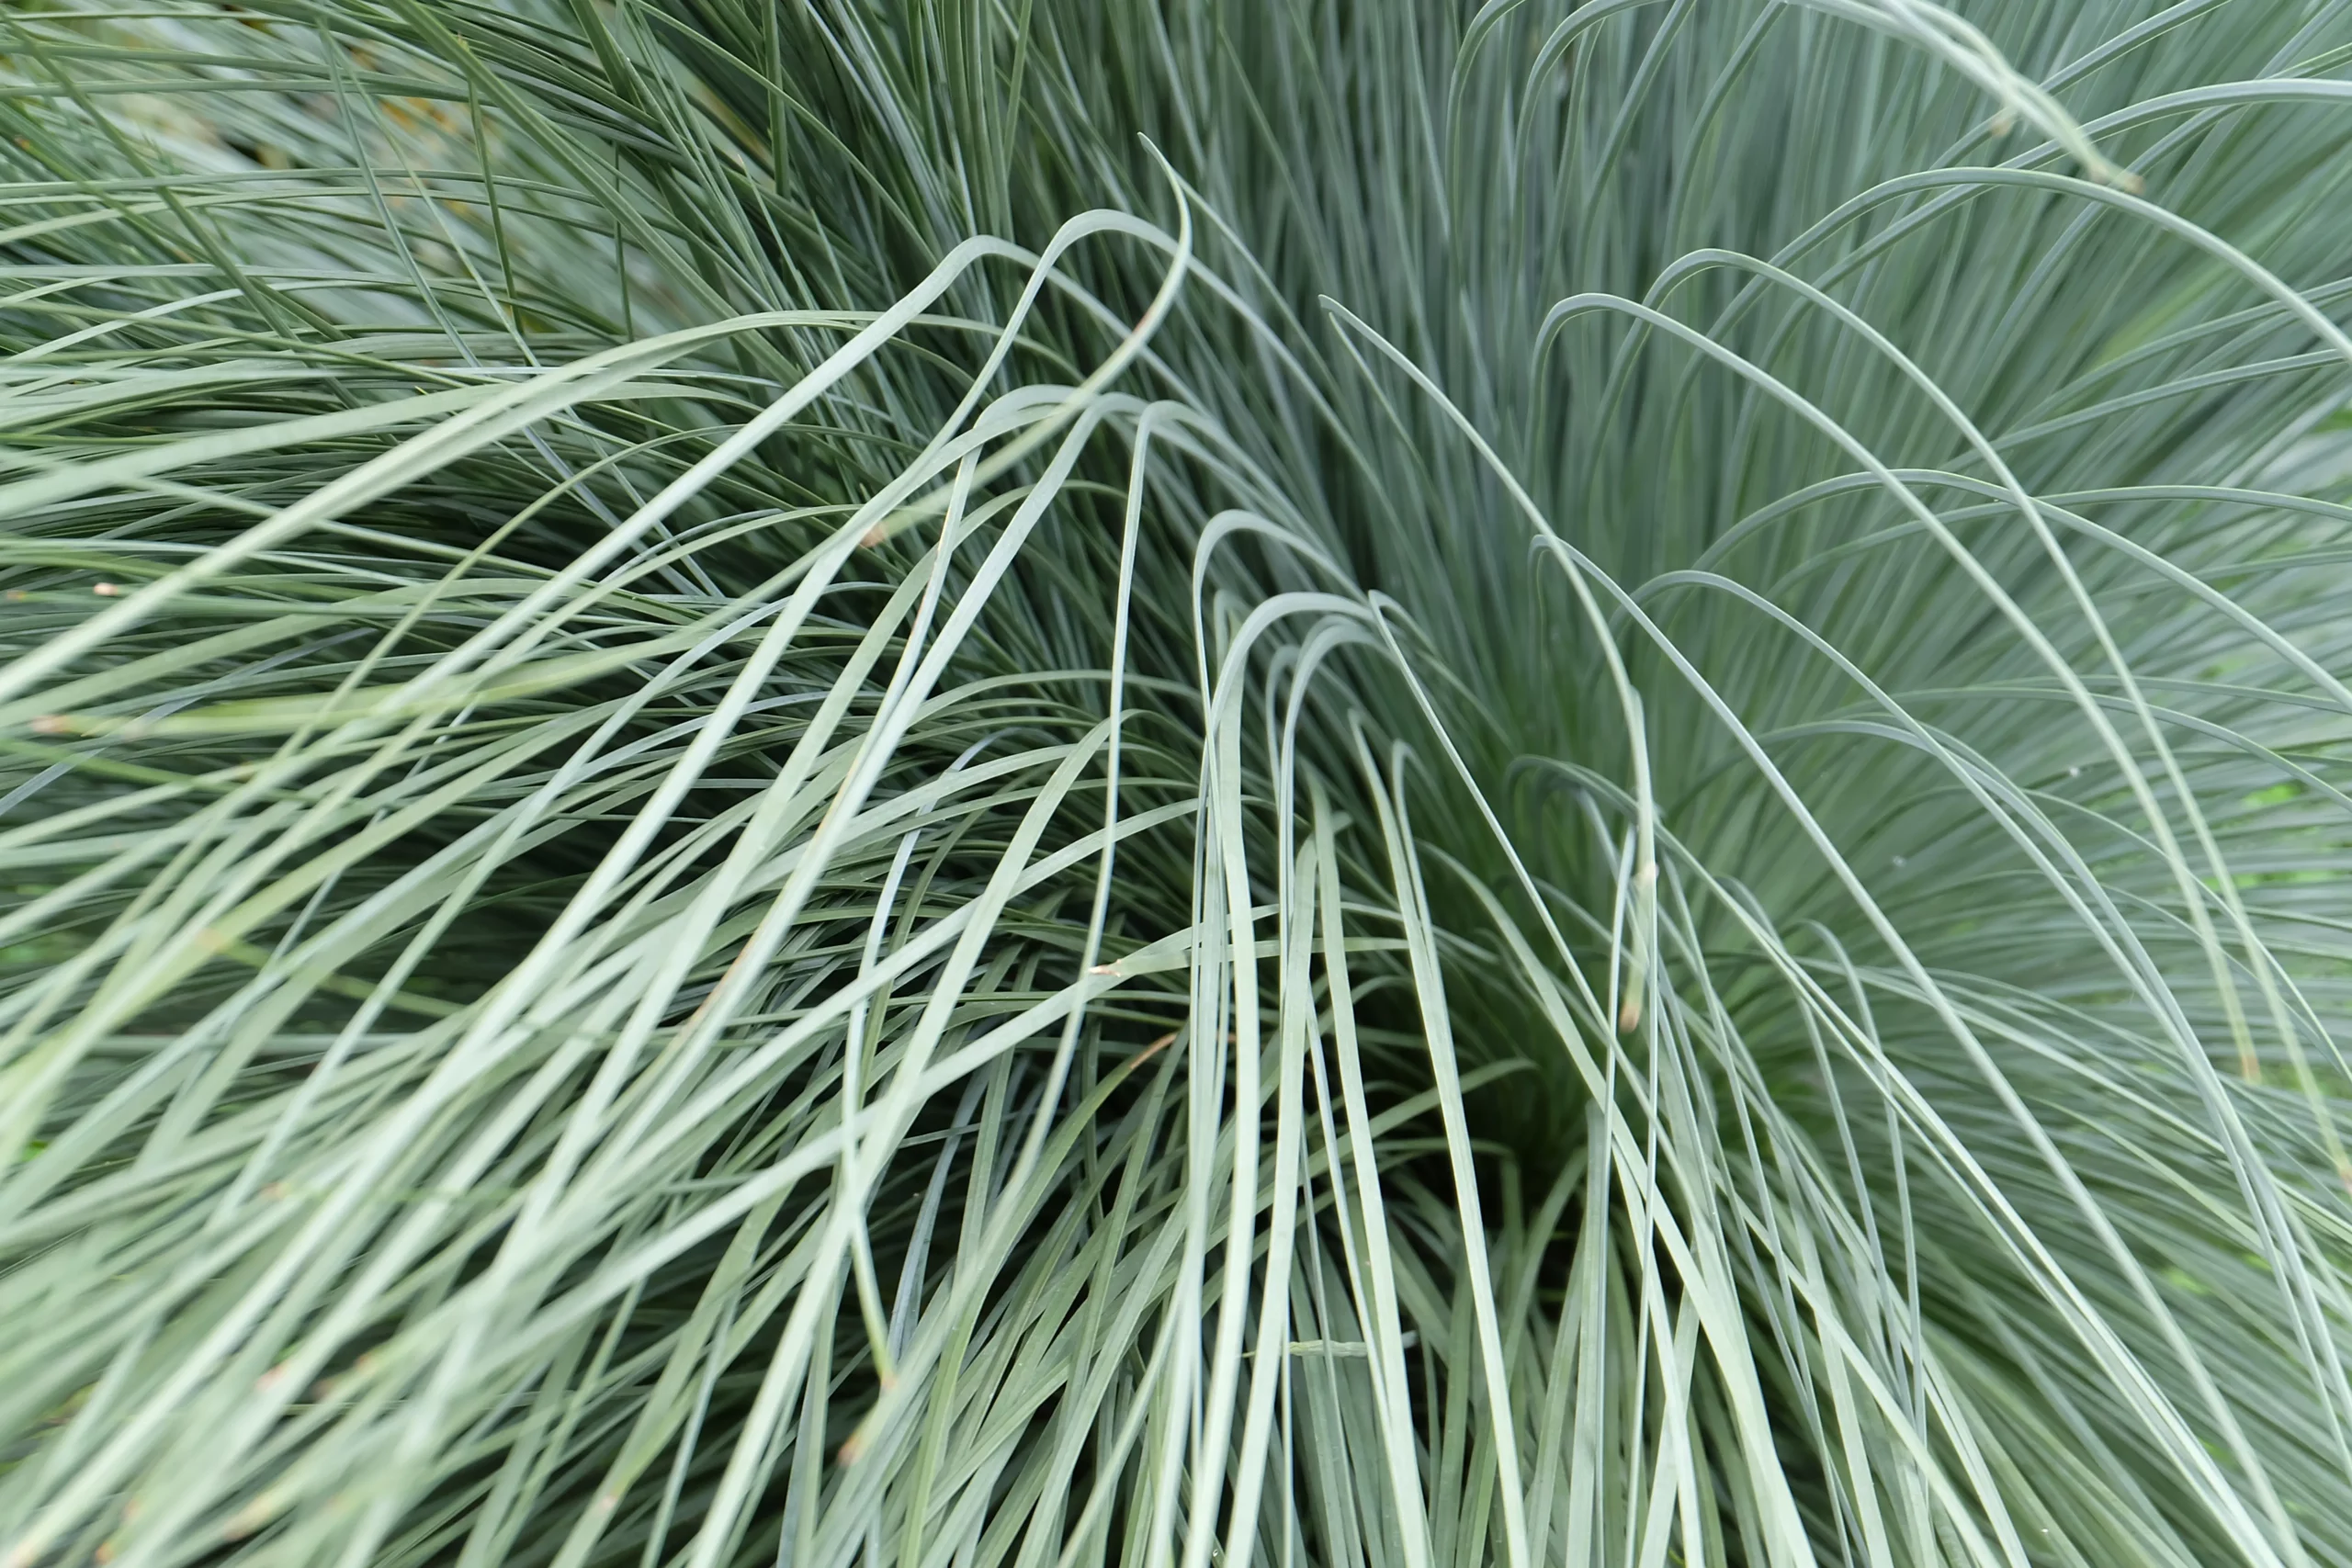 blue_oat_grass_helictotrichon_sempervirens_plant_by_number